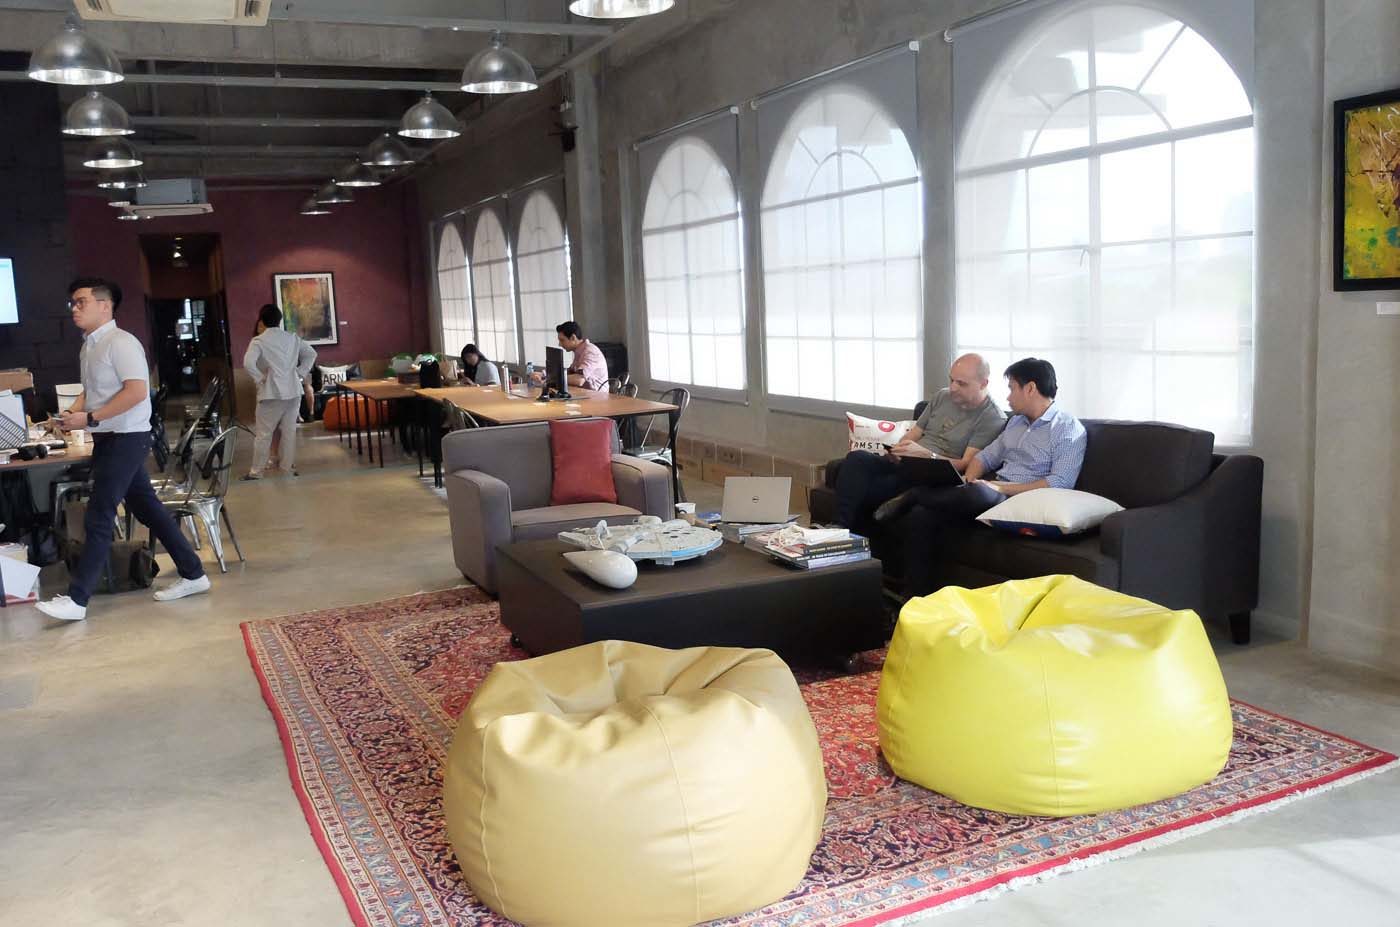 Comfortable sofas and beanbags for workers and visitors to lounge and work in. 